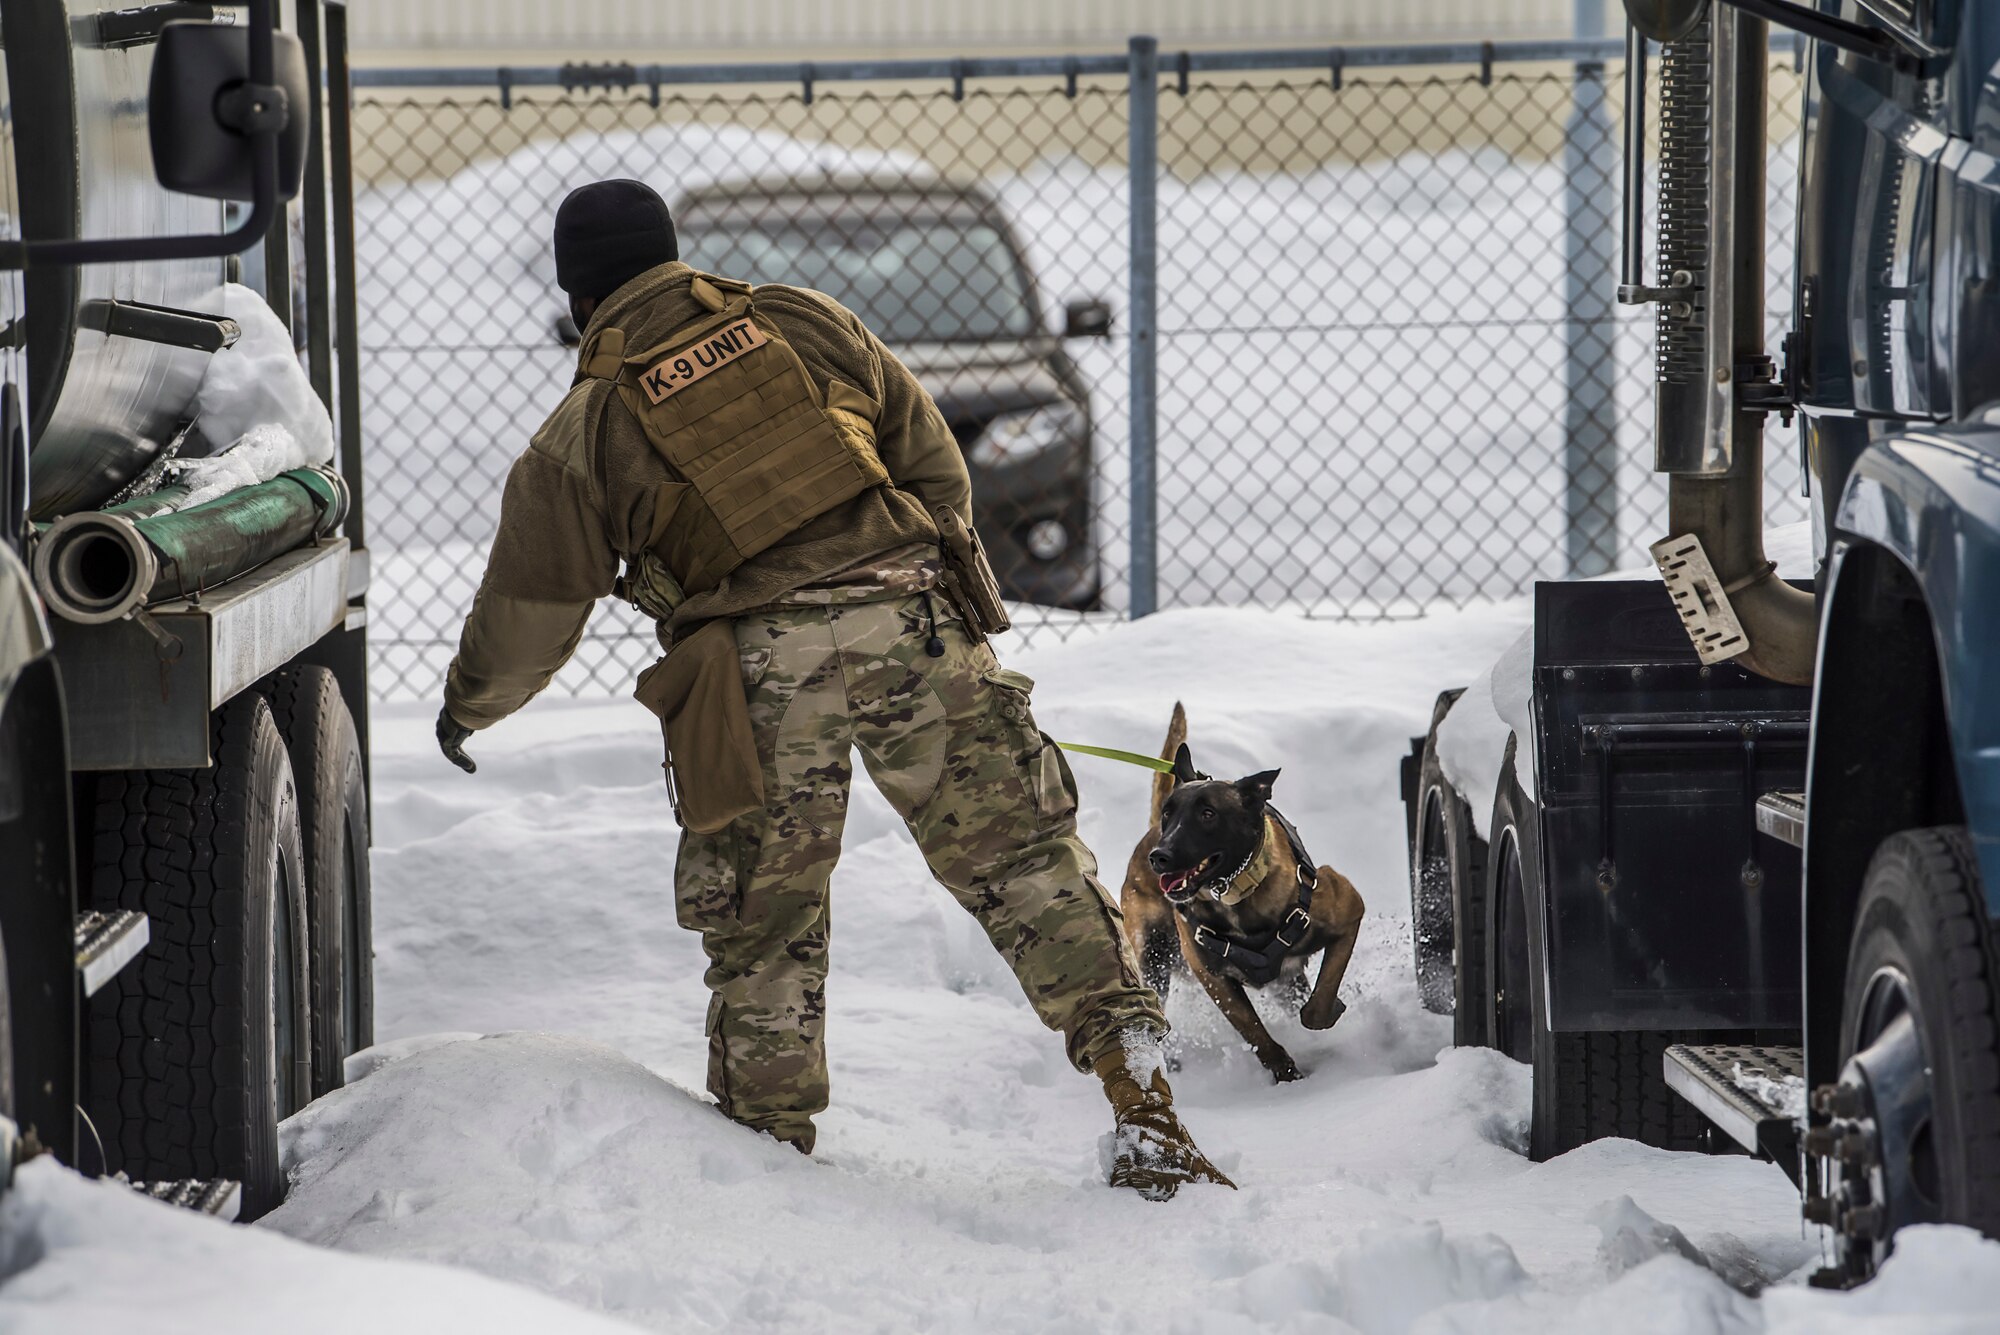 Man in uniform with his back towards the camera, gestures with his left hand to the side of a truck while his dog runs towards it in the snow.